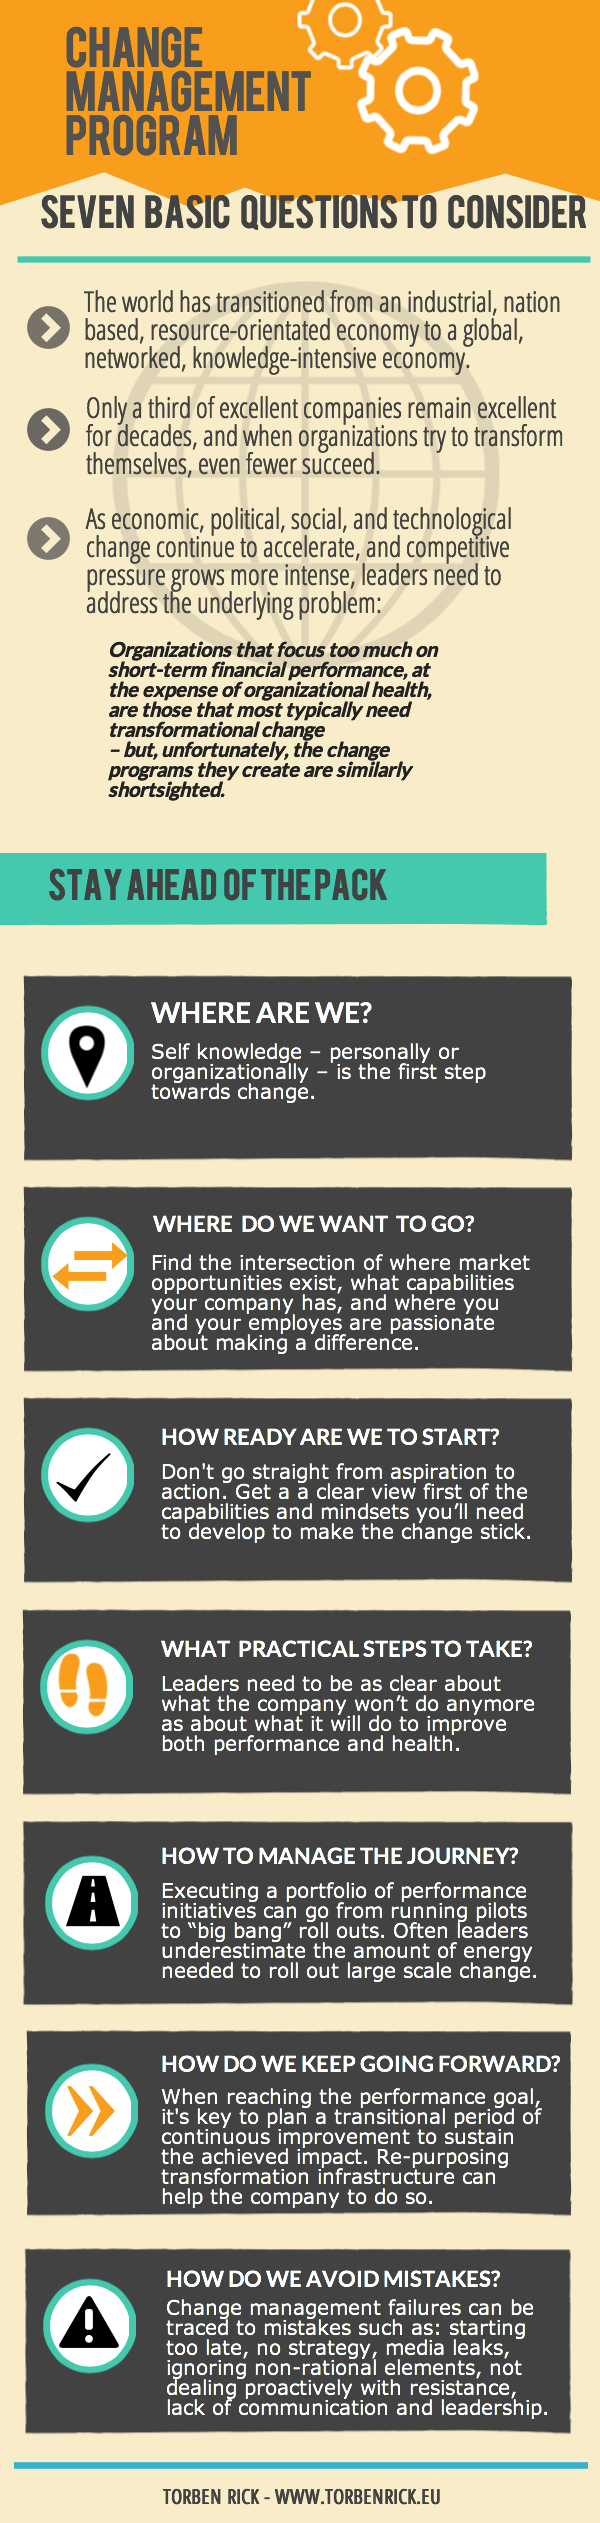 Infographic: Seven basic change management questions to consider